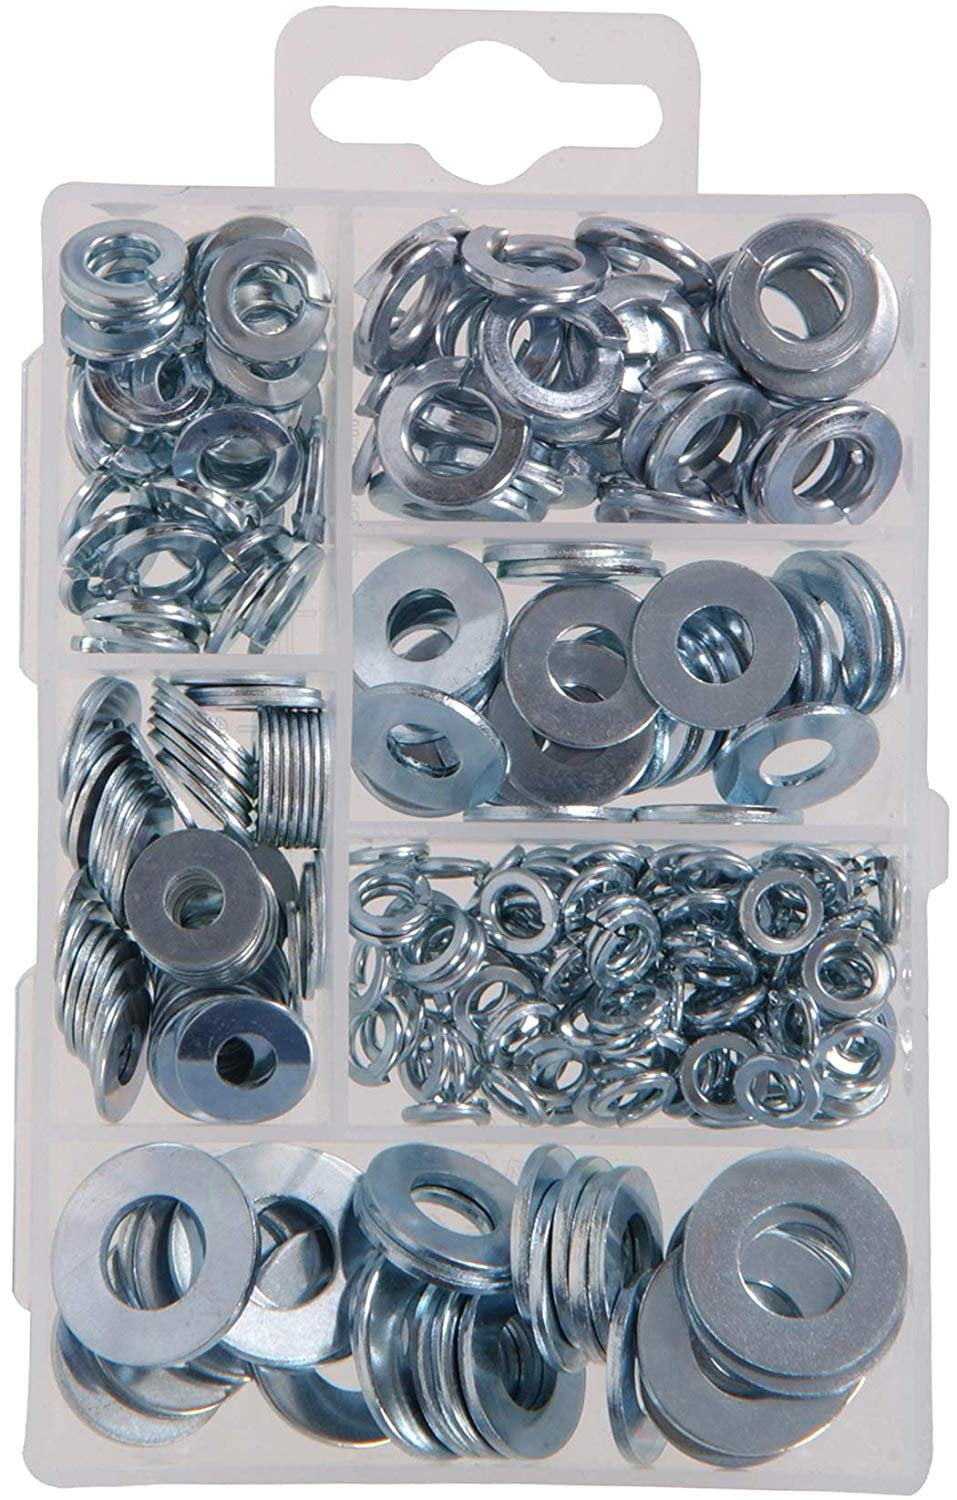 720pc WASHER/LOCK WASHER ASSORTMENT FOR THE MOST COMMON NUTS AND BOLTS D00364 